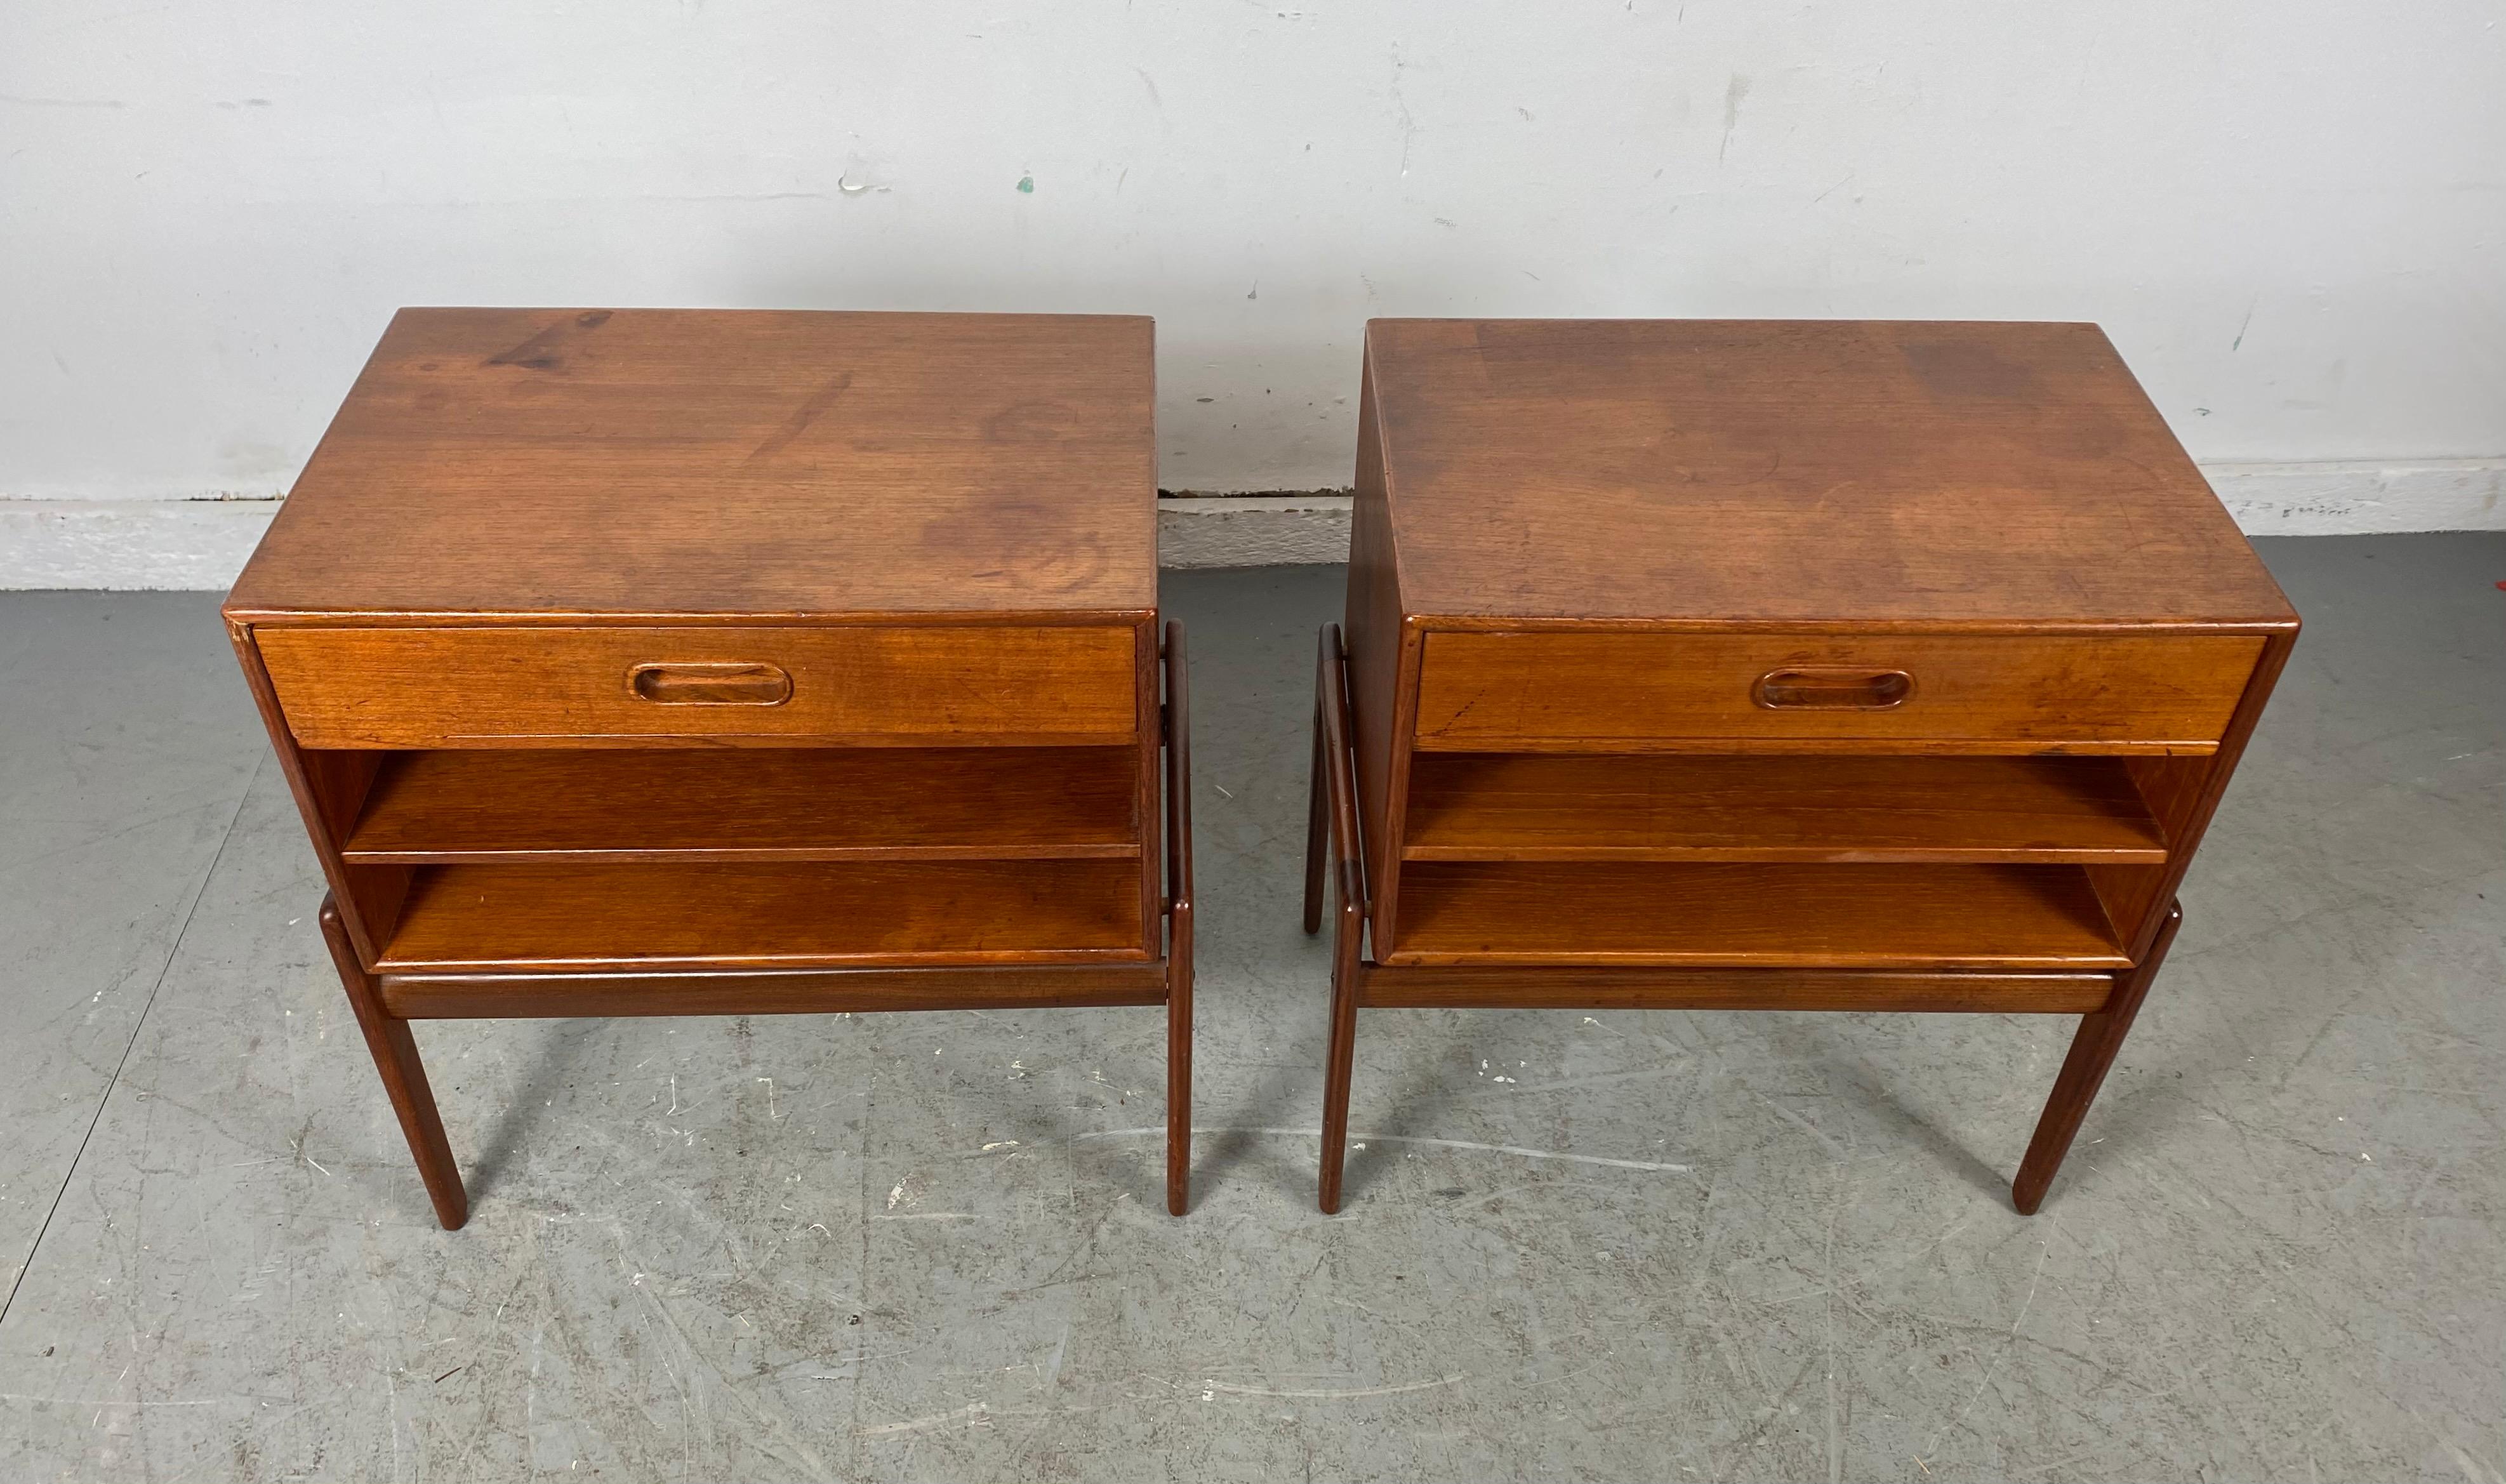 Matched pair 1-drawer teak Nite stands made in Denmark by Asbjørn-Mobler. Attributed to Svend Madsen Classic Scandinavian Modern design, superior quality and construction, retains original finish, patina, also retains early label. Tops a bit